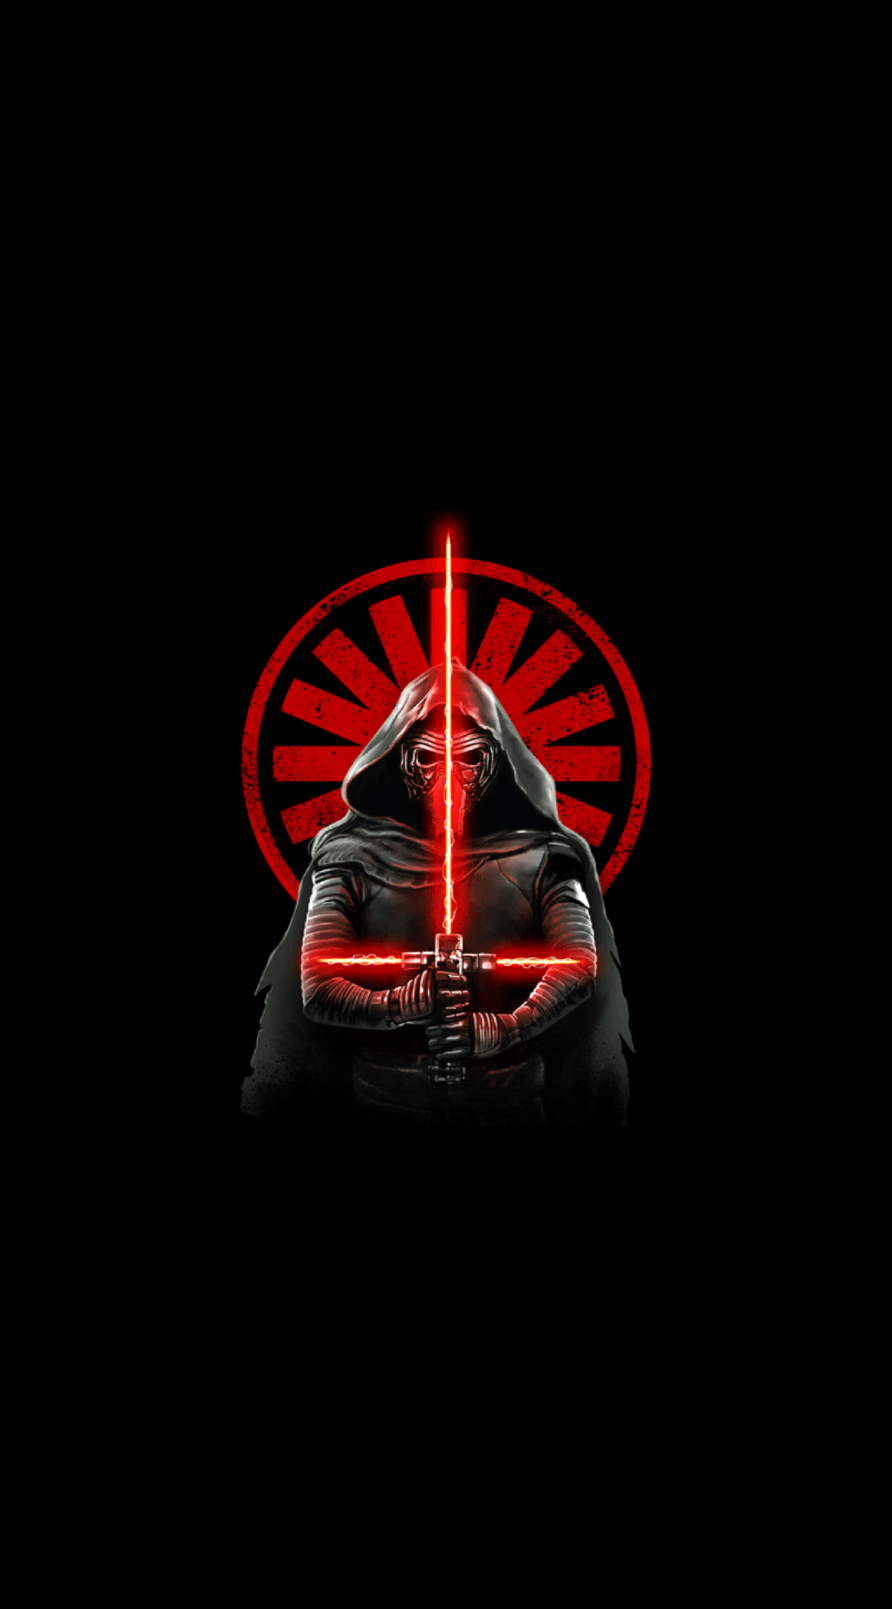 Top kylo ren mask wallpaper Download Book Source for free download HD, 4K & high quality wallpaper